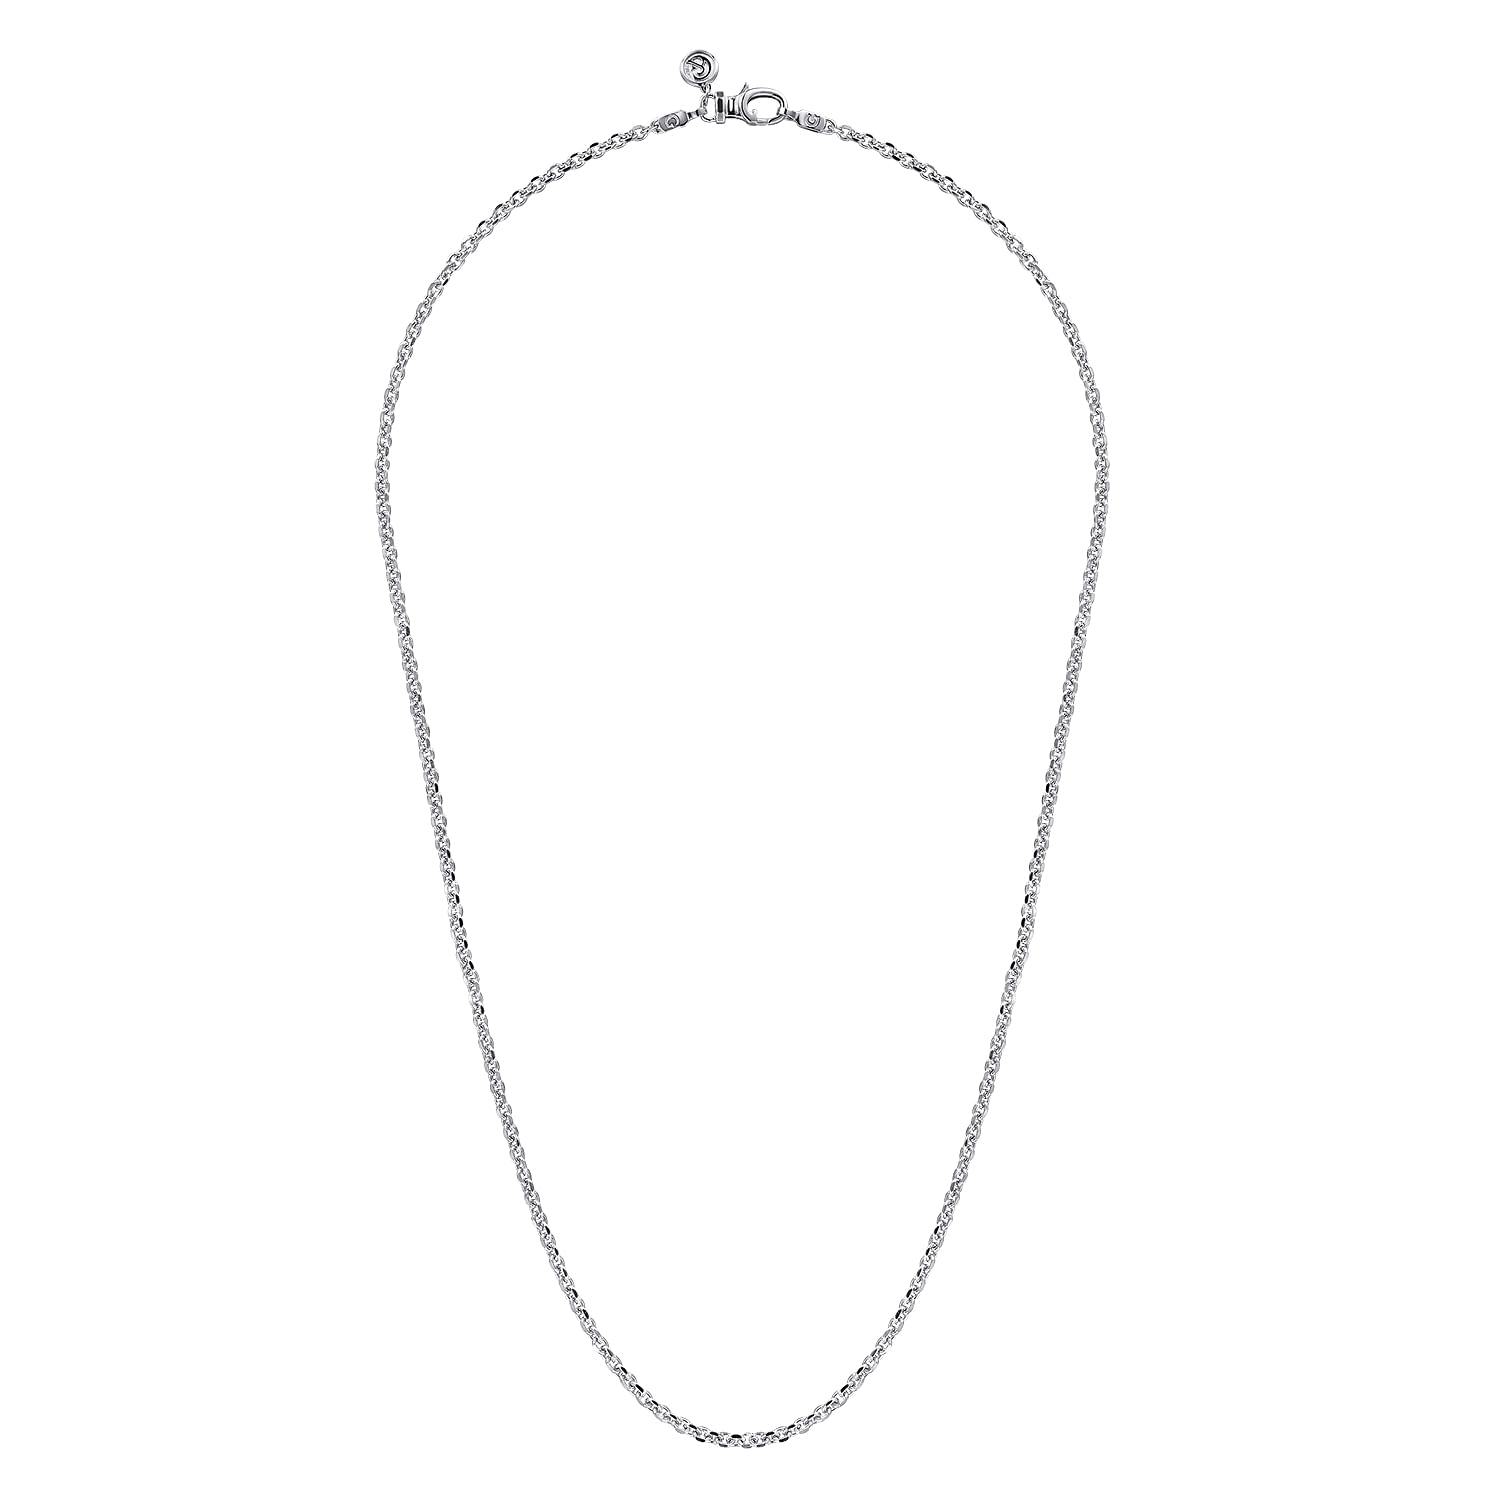 22 Inch 14K White Gold Men's Link Chain Necklace